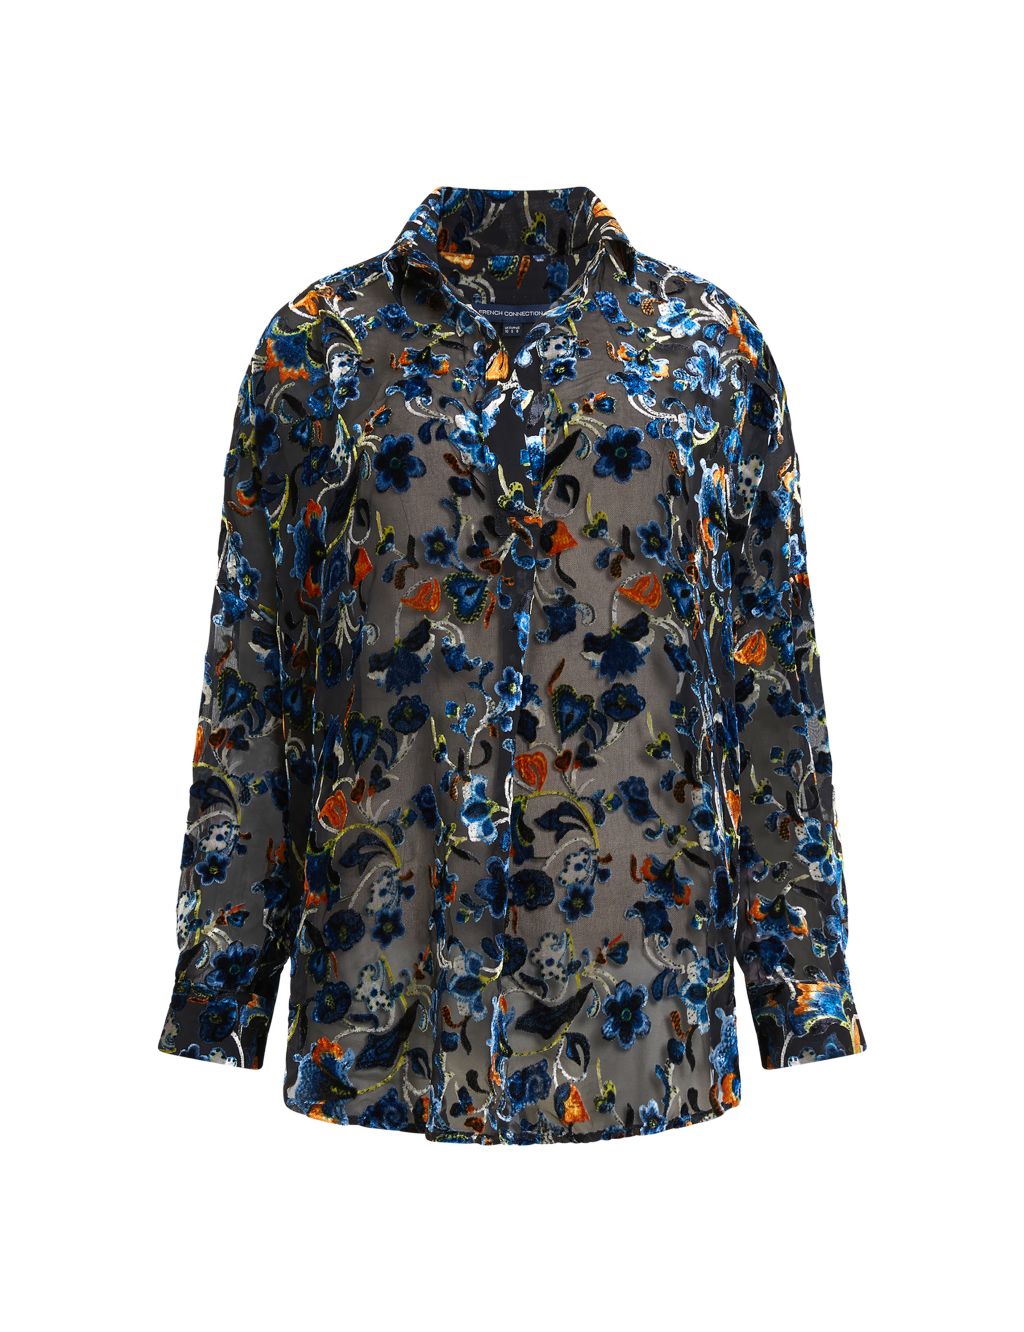 Floral Collared Shirt image 2